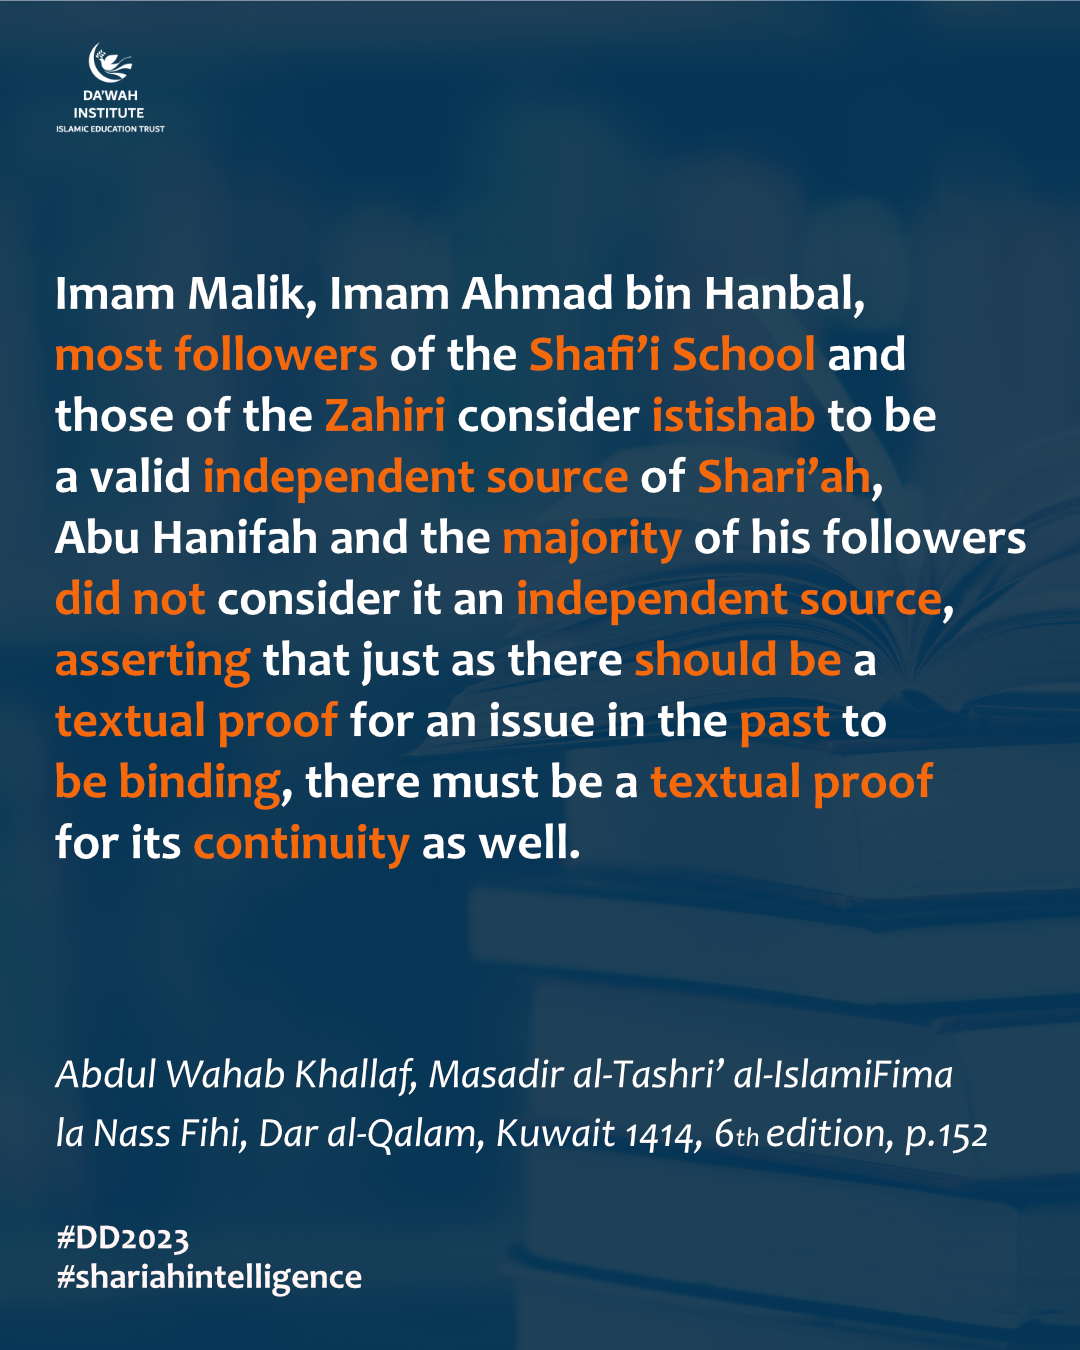 Scholars consider istishab to be a valid independent source of Shari’ah,